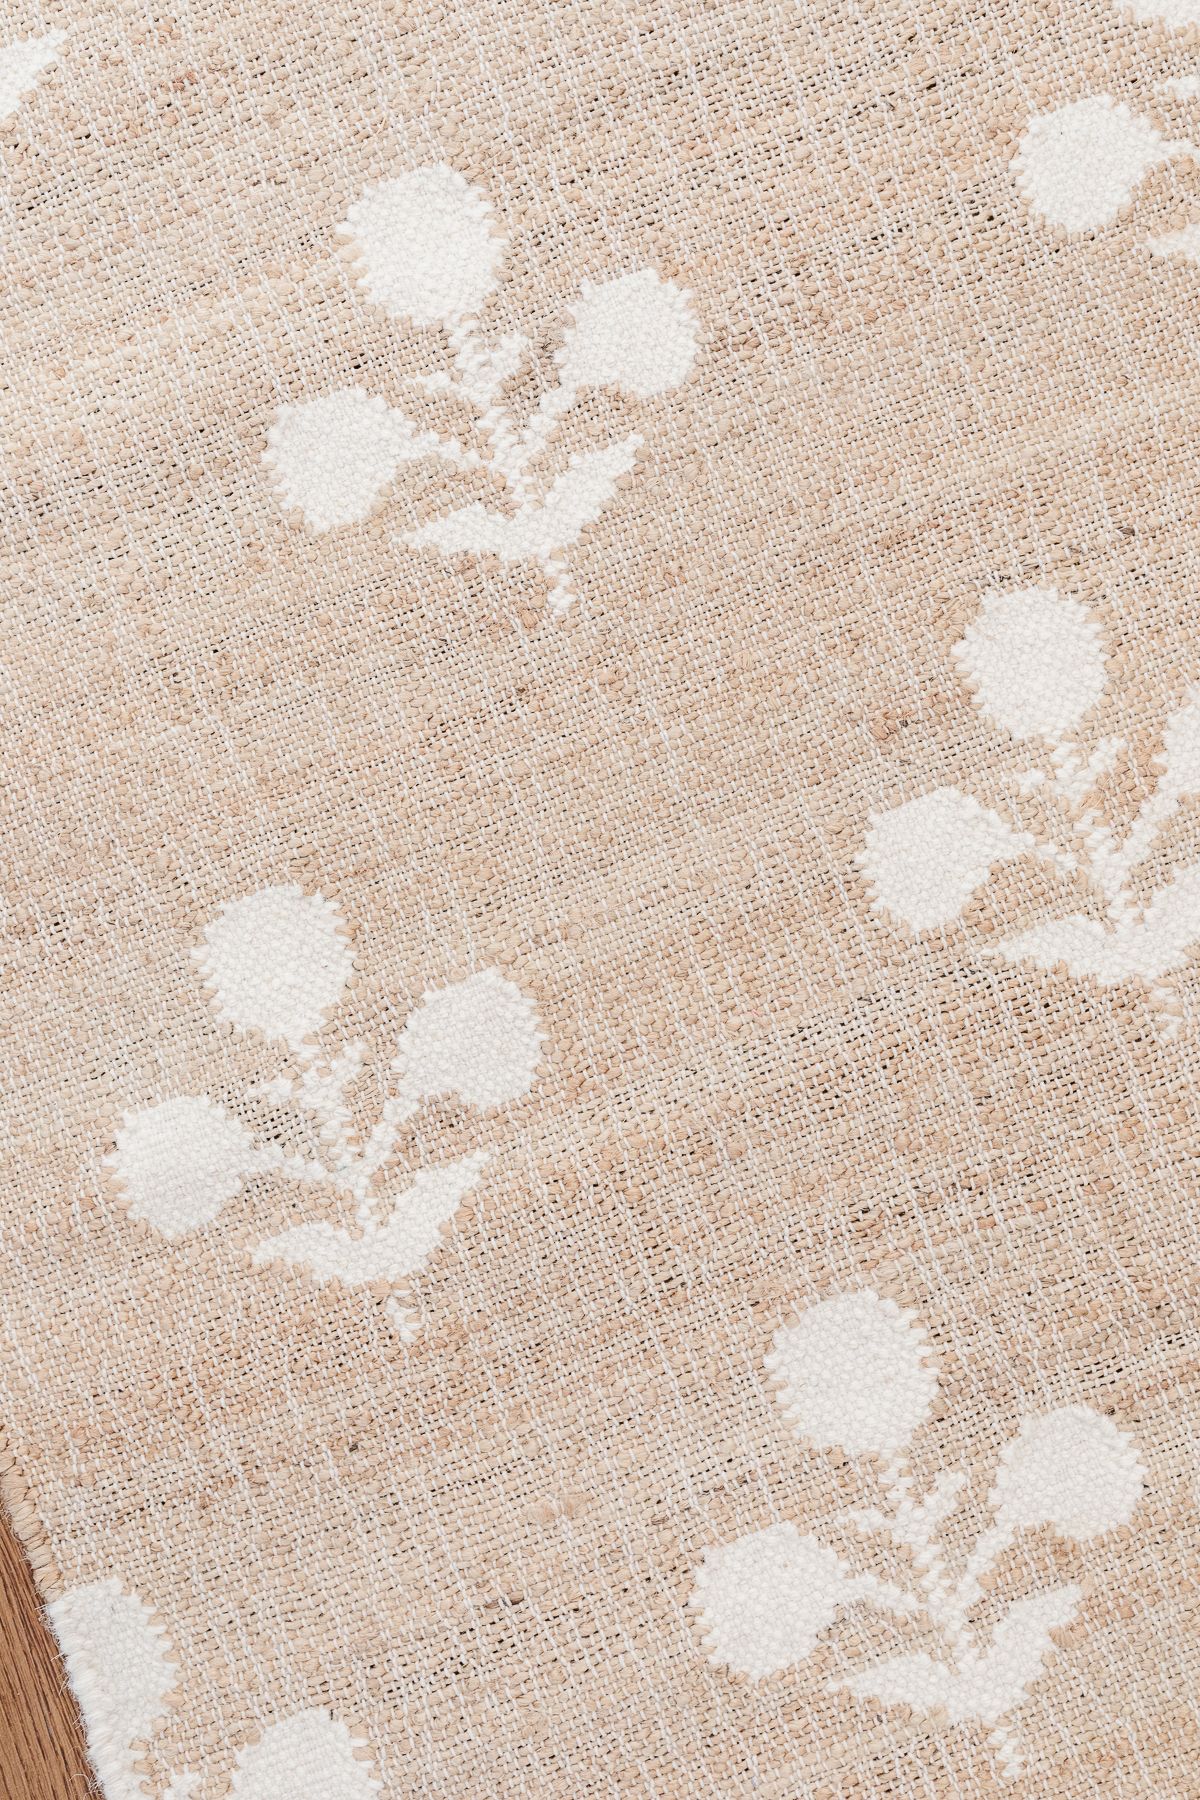 A close up of a white block print rug